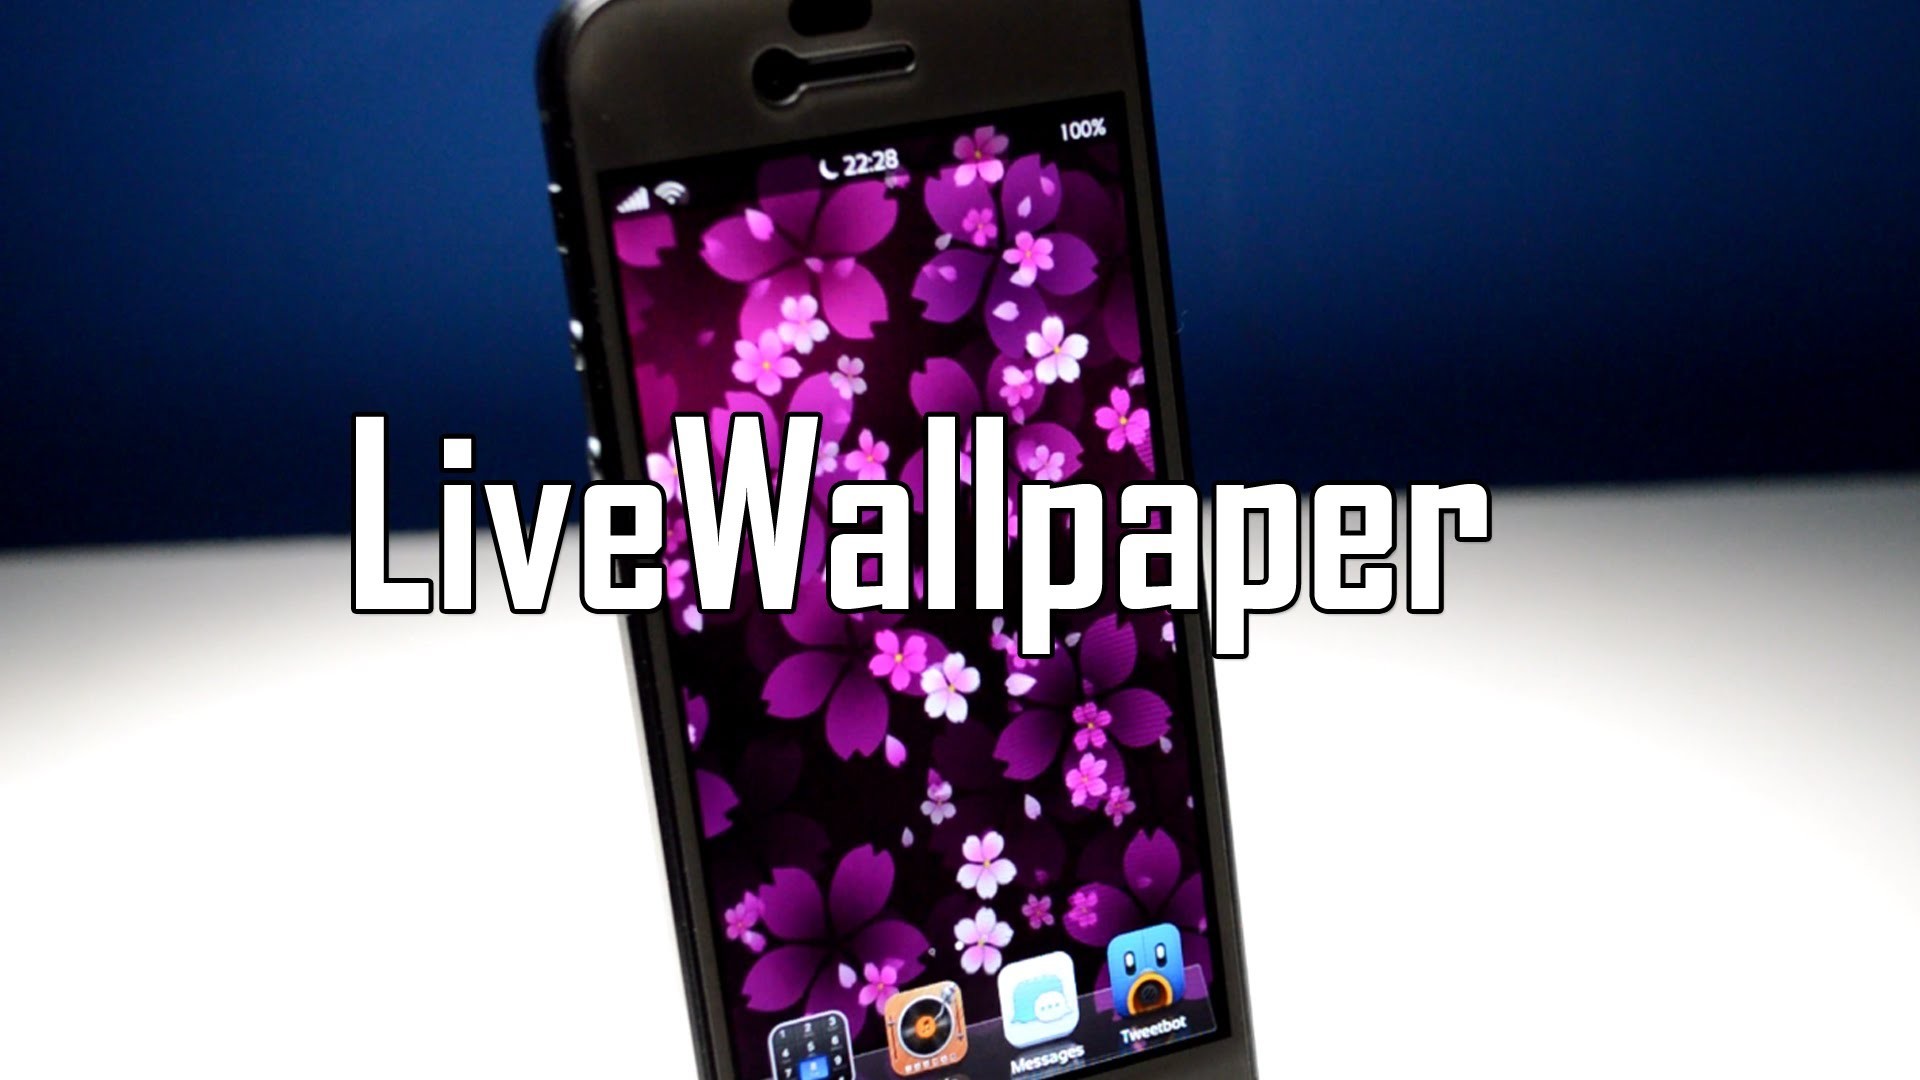 1920x1080 LiveWallpaper - Live Wallpapers & Scrolling Background On iPhone 5/iOS 6 -  YouTube